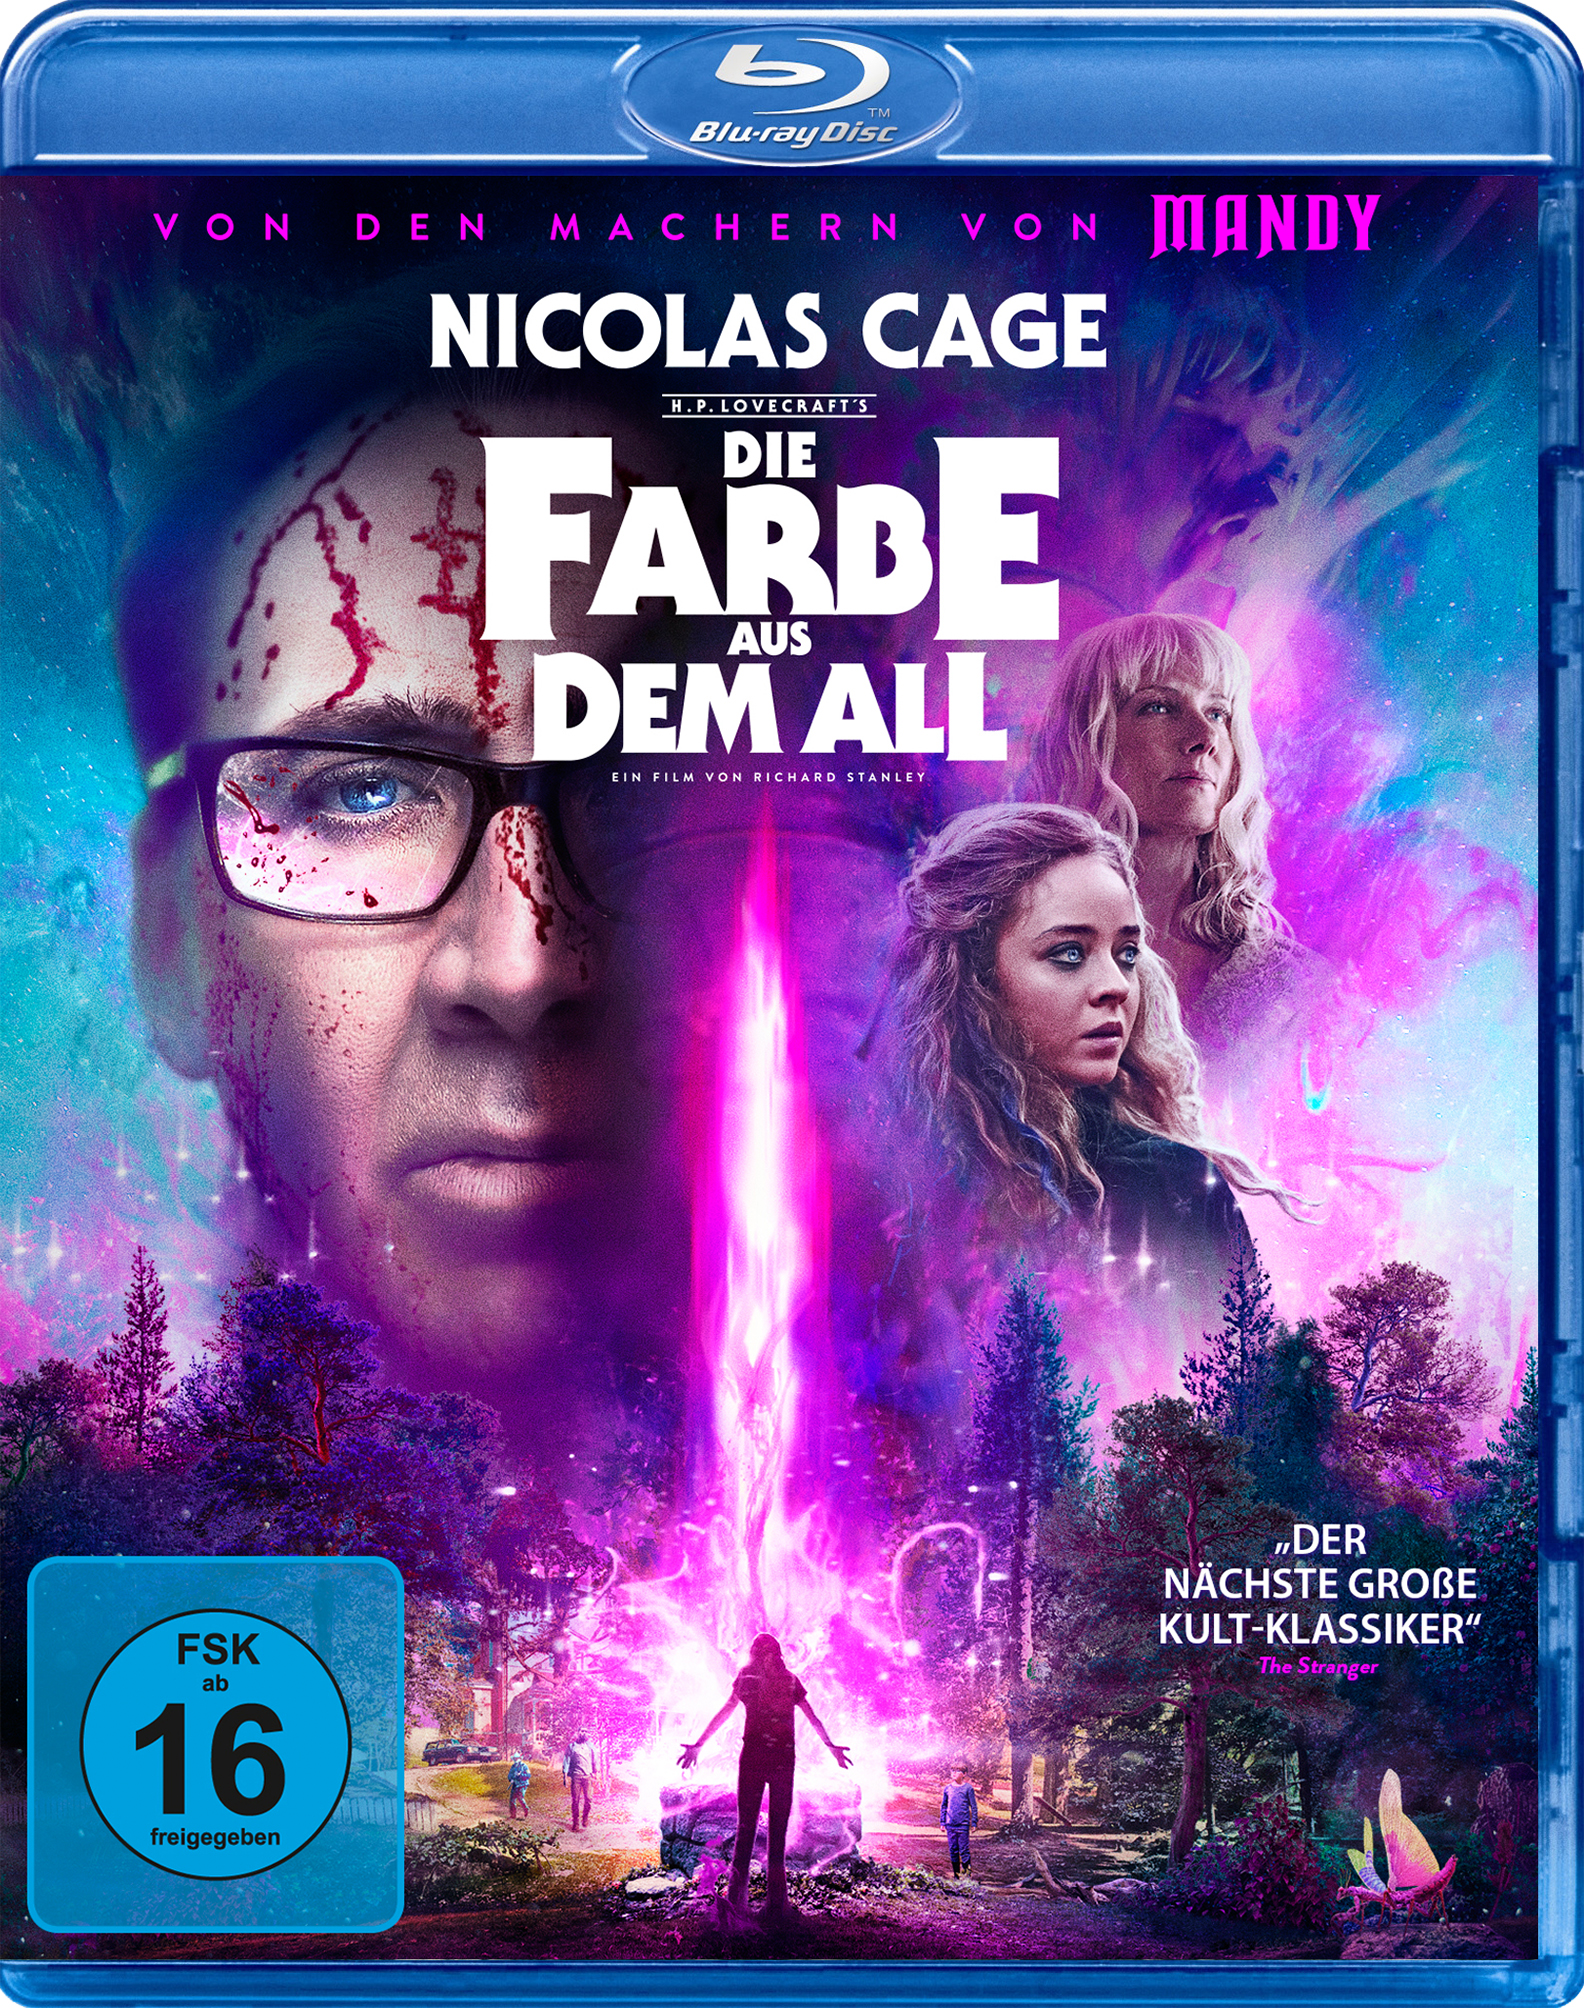 Die Farbe aus dem All Blu-ray of Out - Color Space